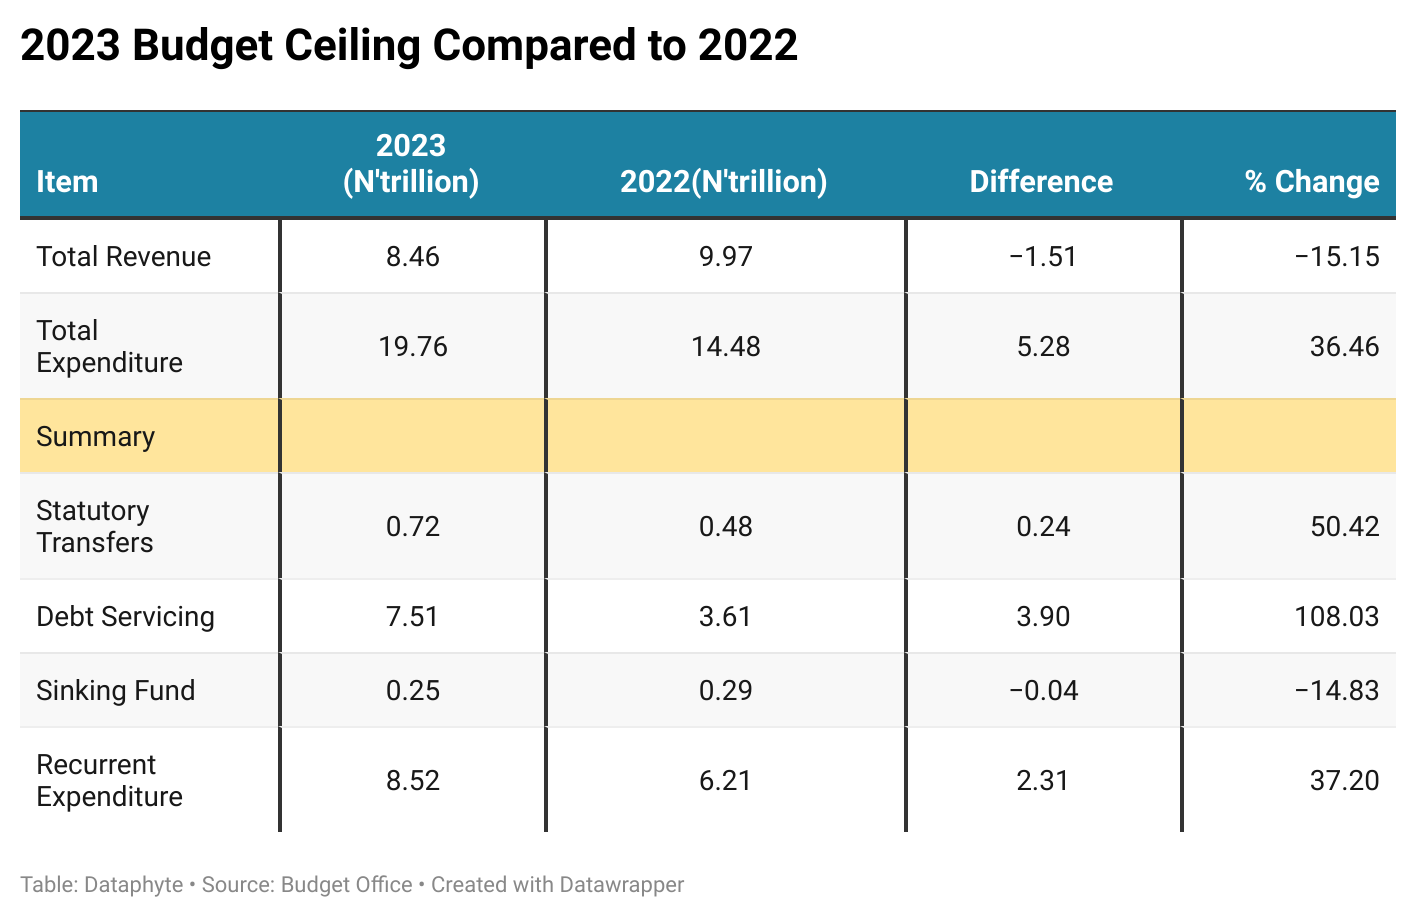 2023 Budget Call: High Expenditures, Budget Ceilings and Other Matters